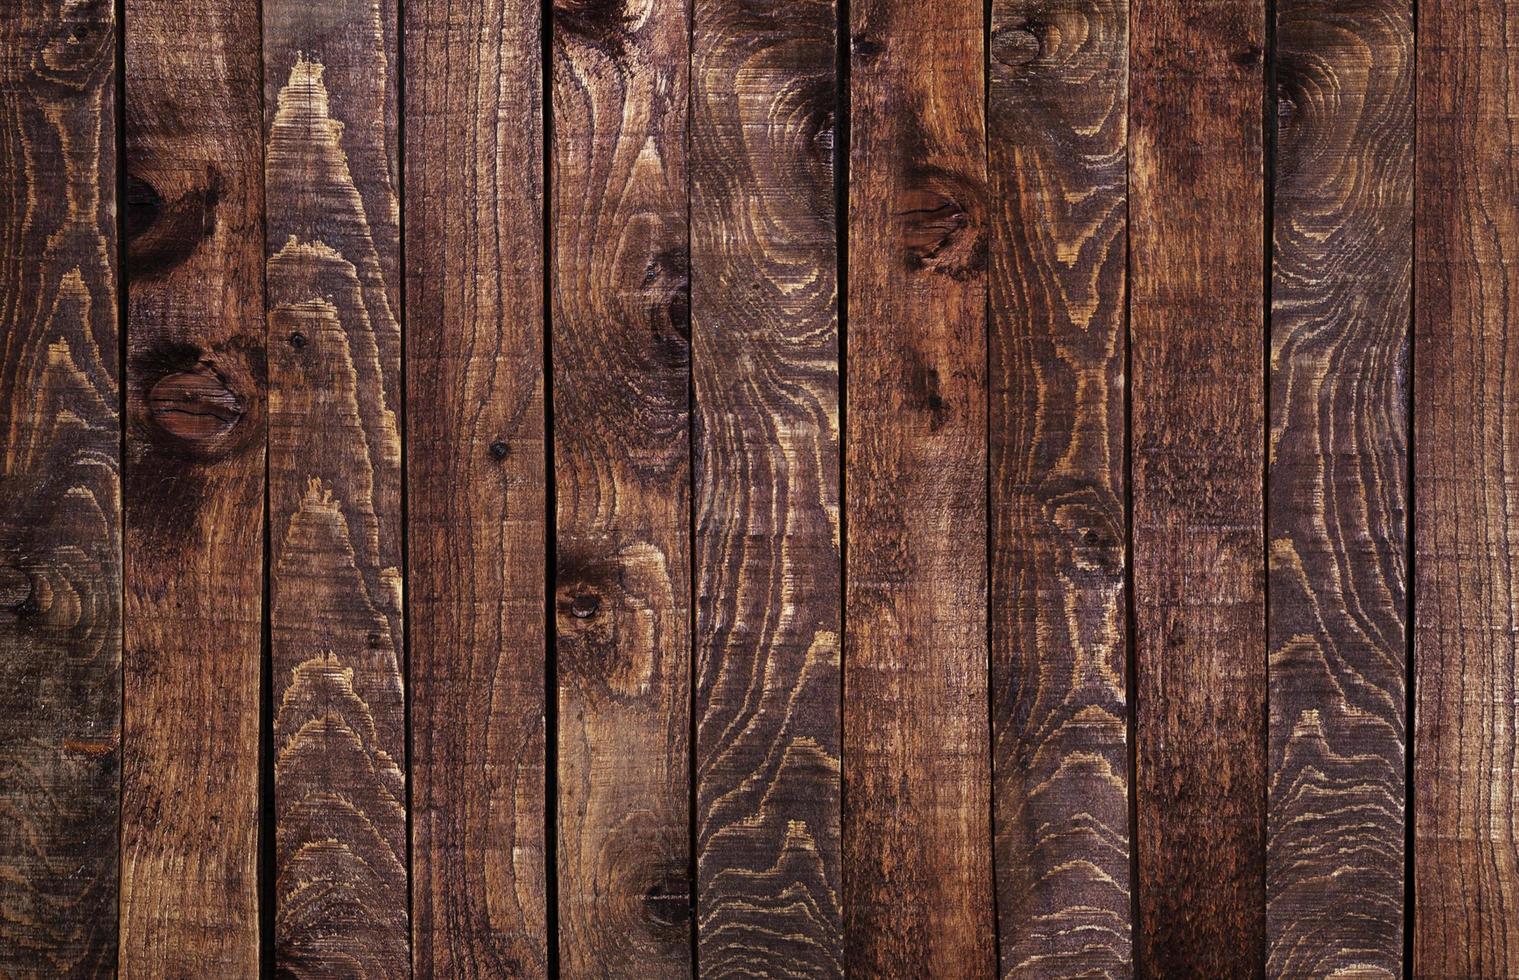 https://static.vecteezy.com/system/resources/previews/007/287/315/non_2x/wooden-background-rustic-brown-planks-texture-old-wood-wall-backdrop-free-photo.jpg